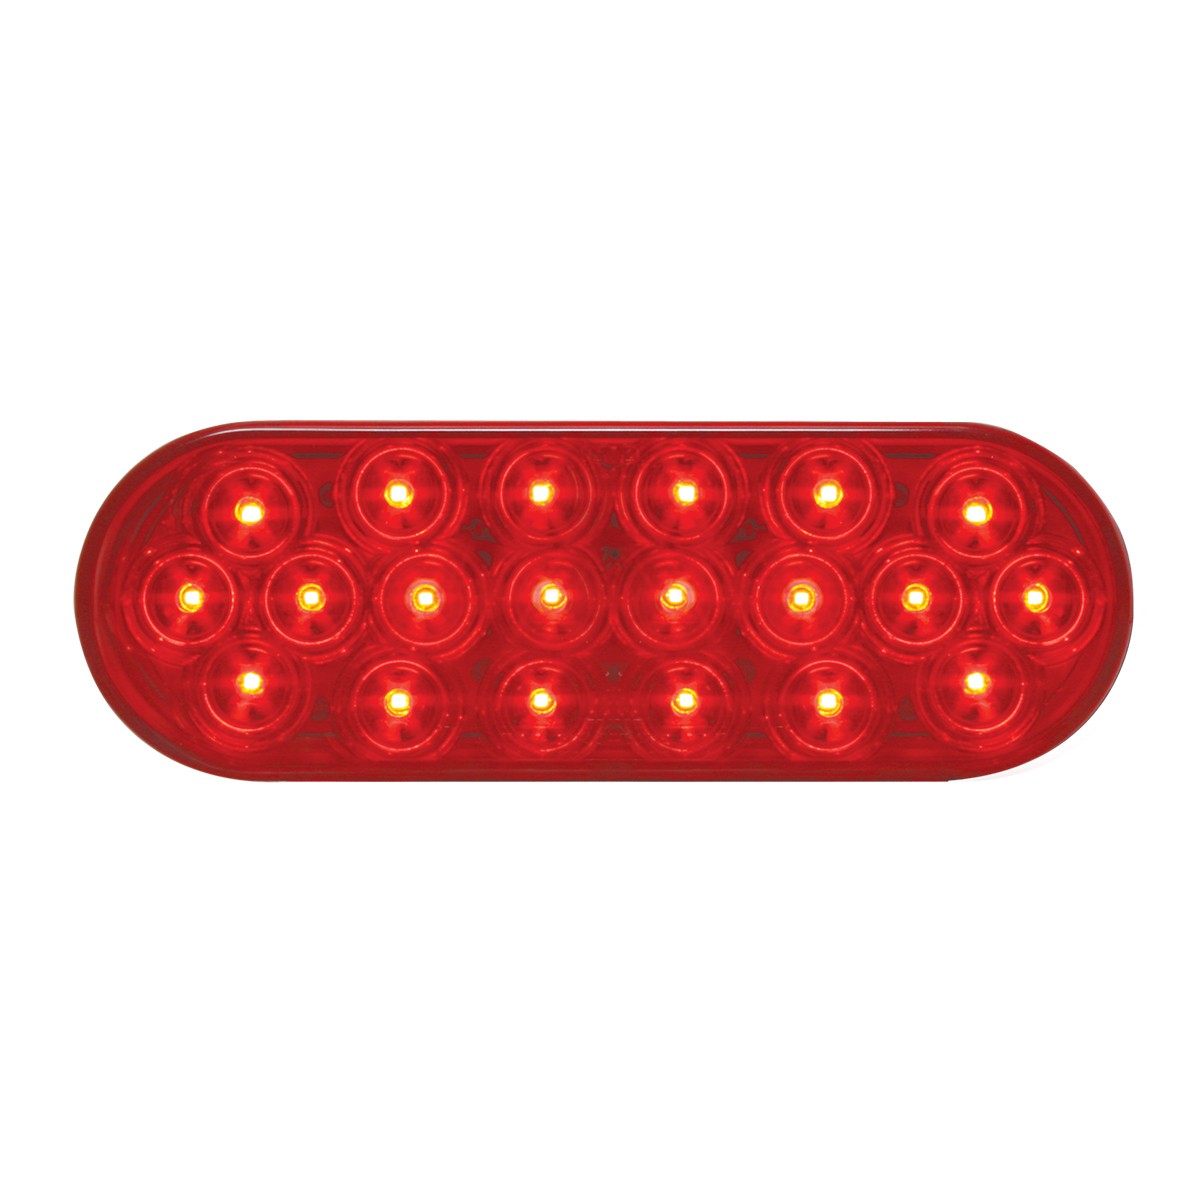 Fleet Red oval 20 diode LED stop turn tail light "